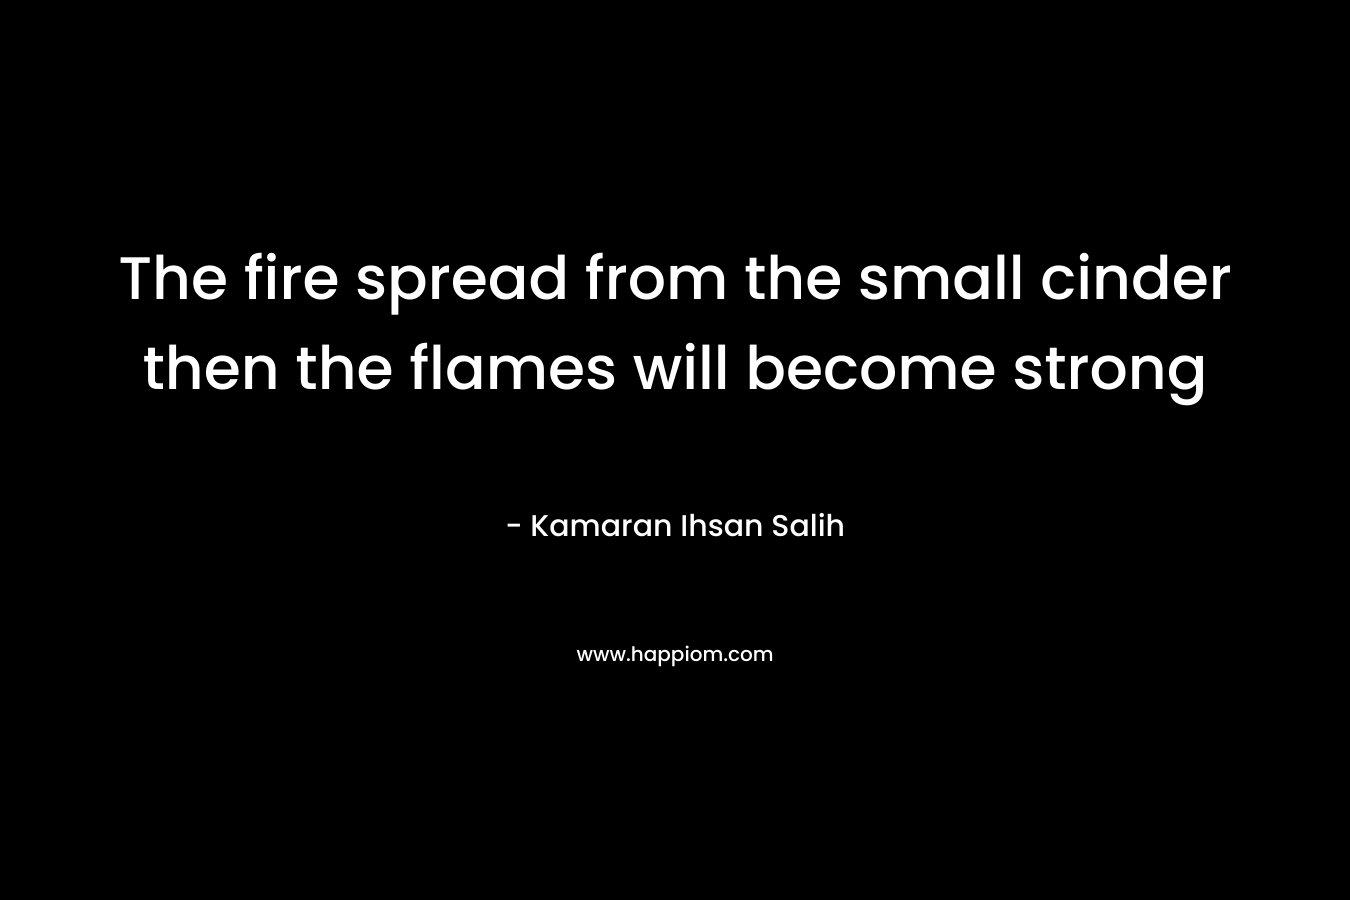 The fire spread from the small cinder then the flames will become strong